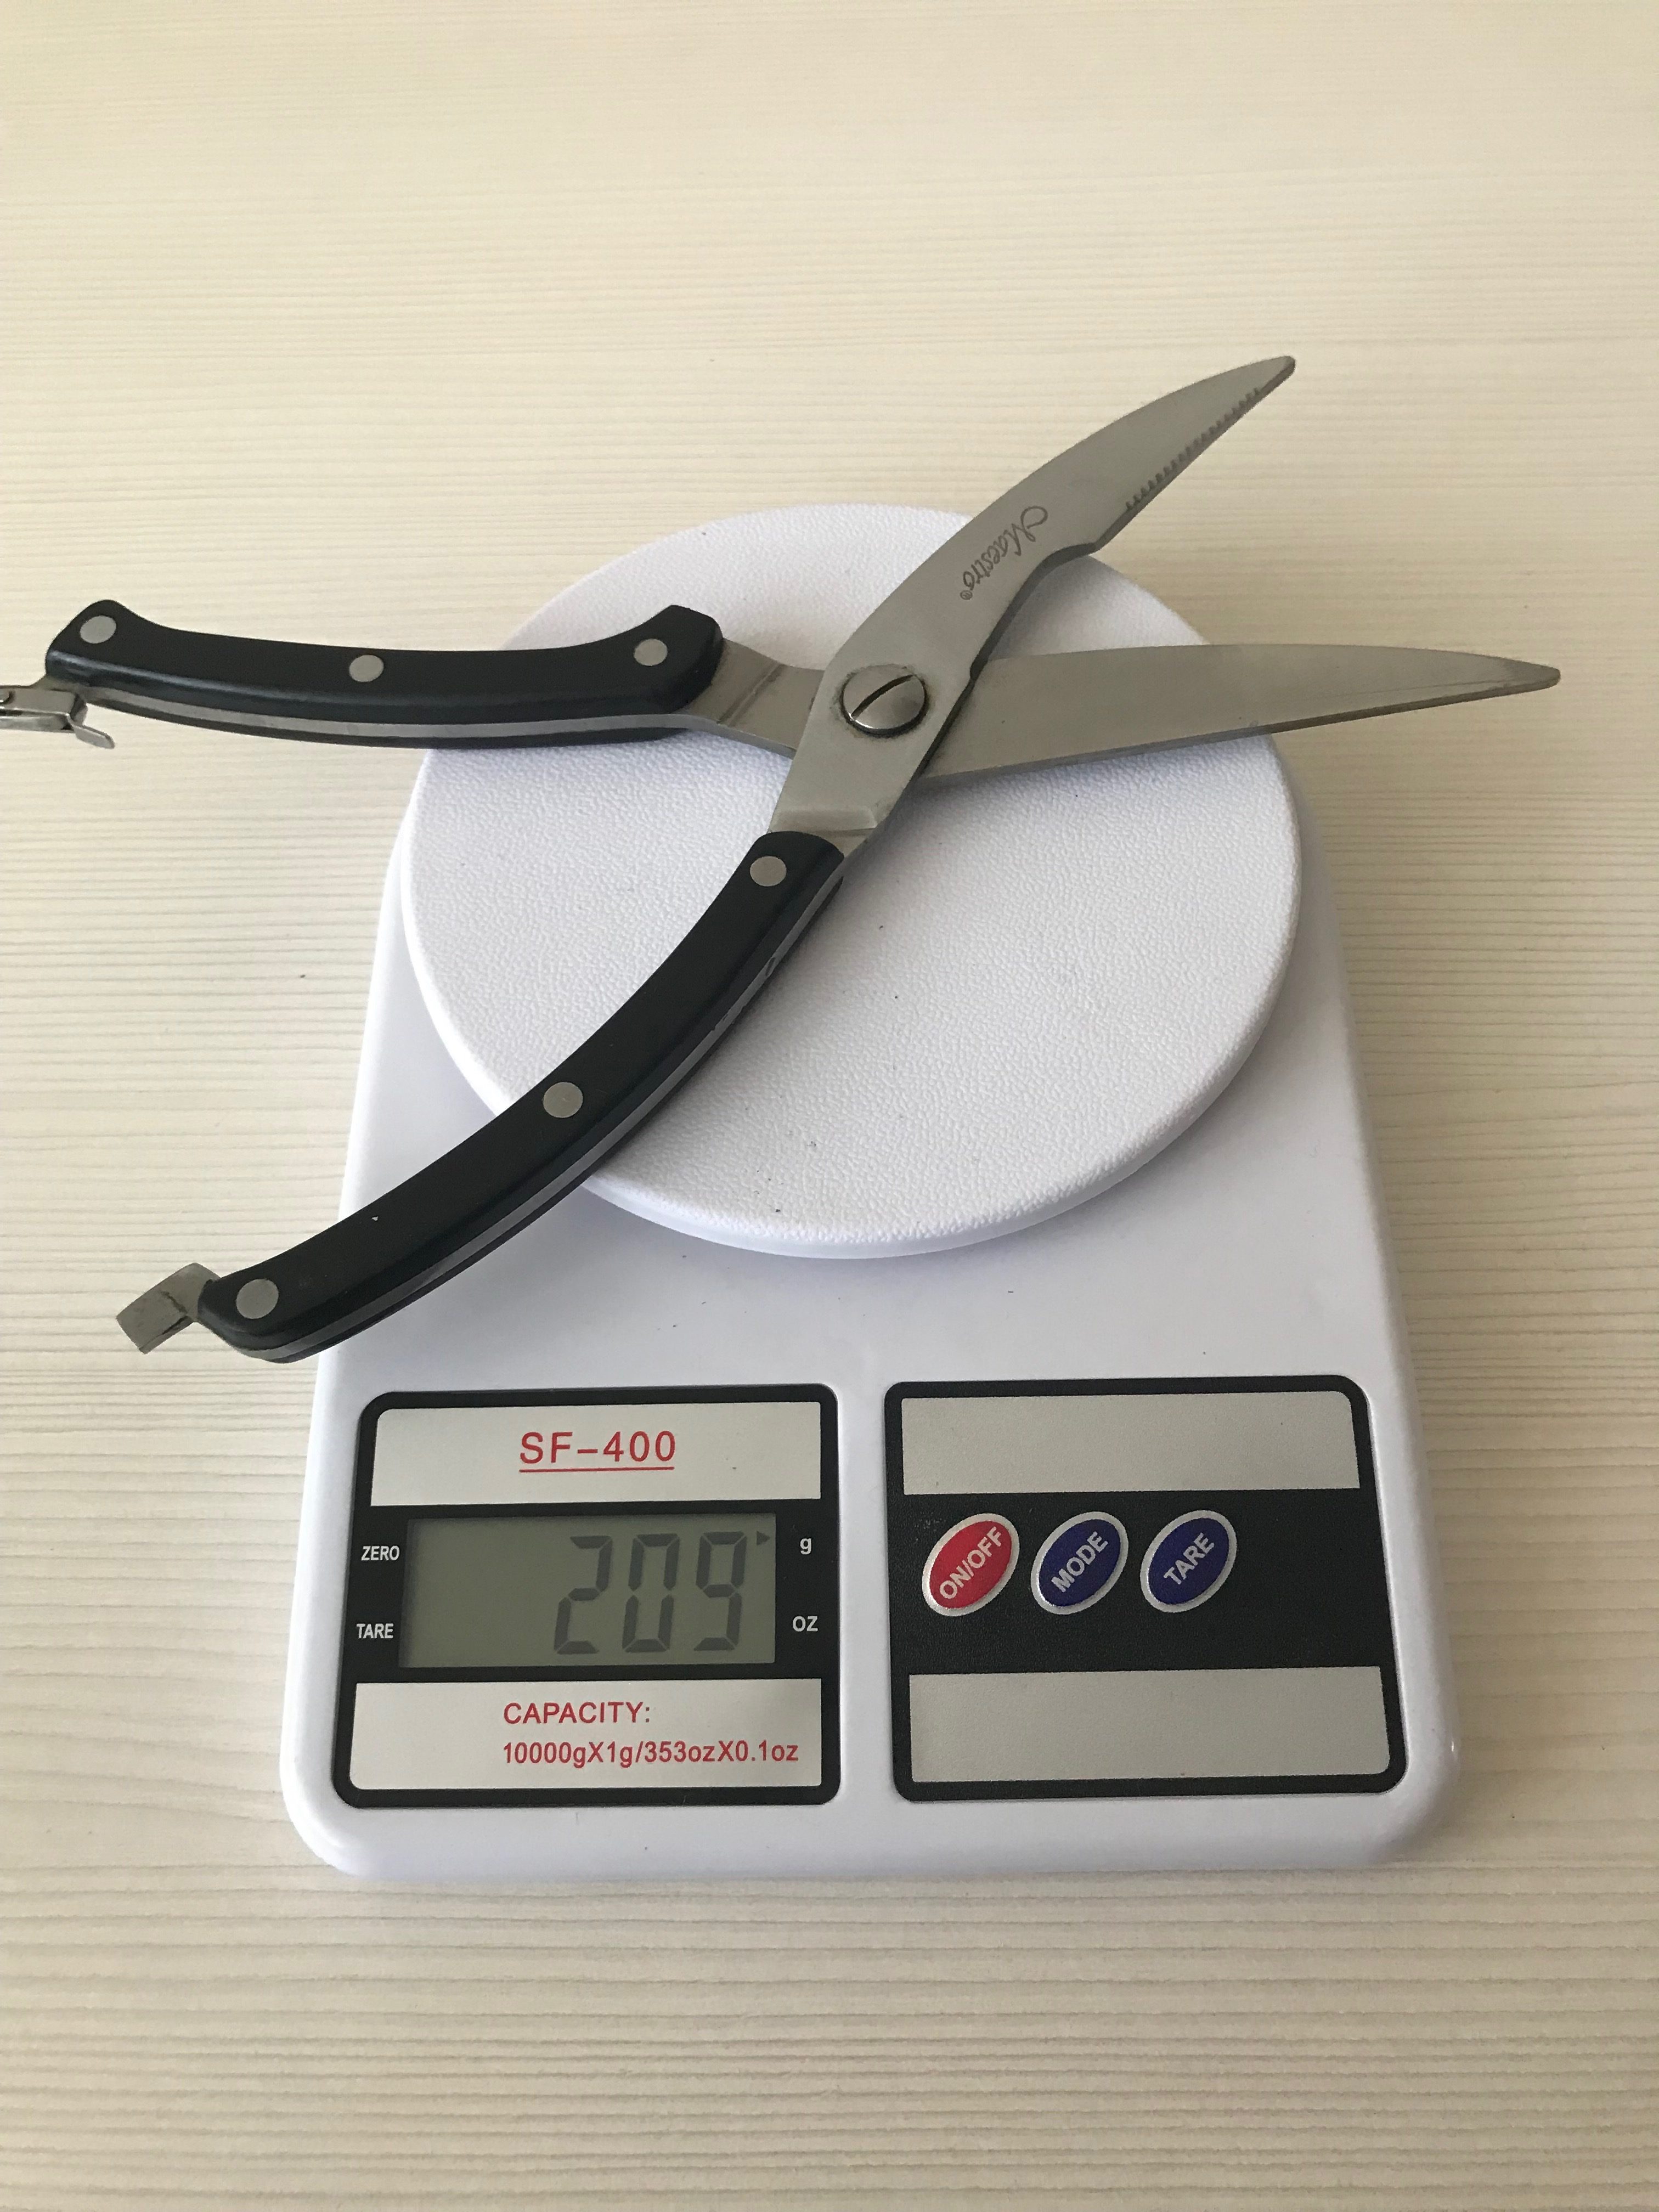 weight of kitchen shears